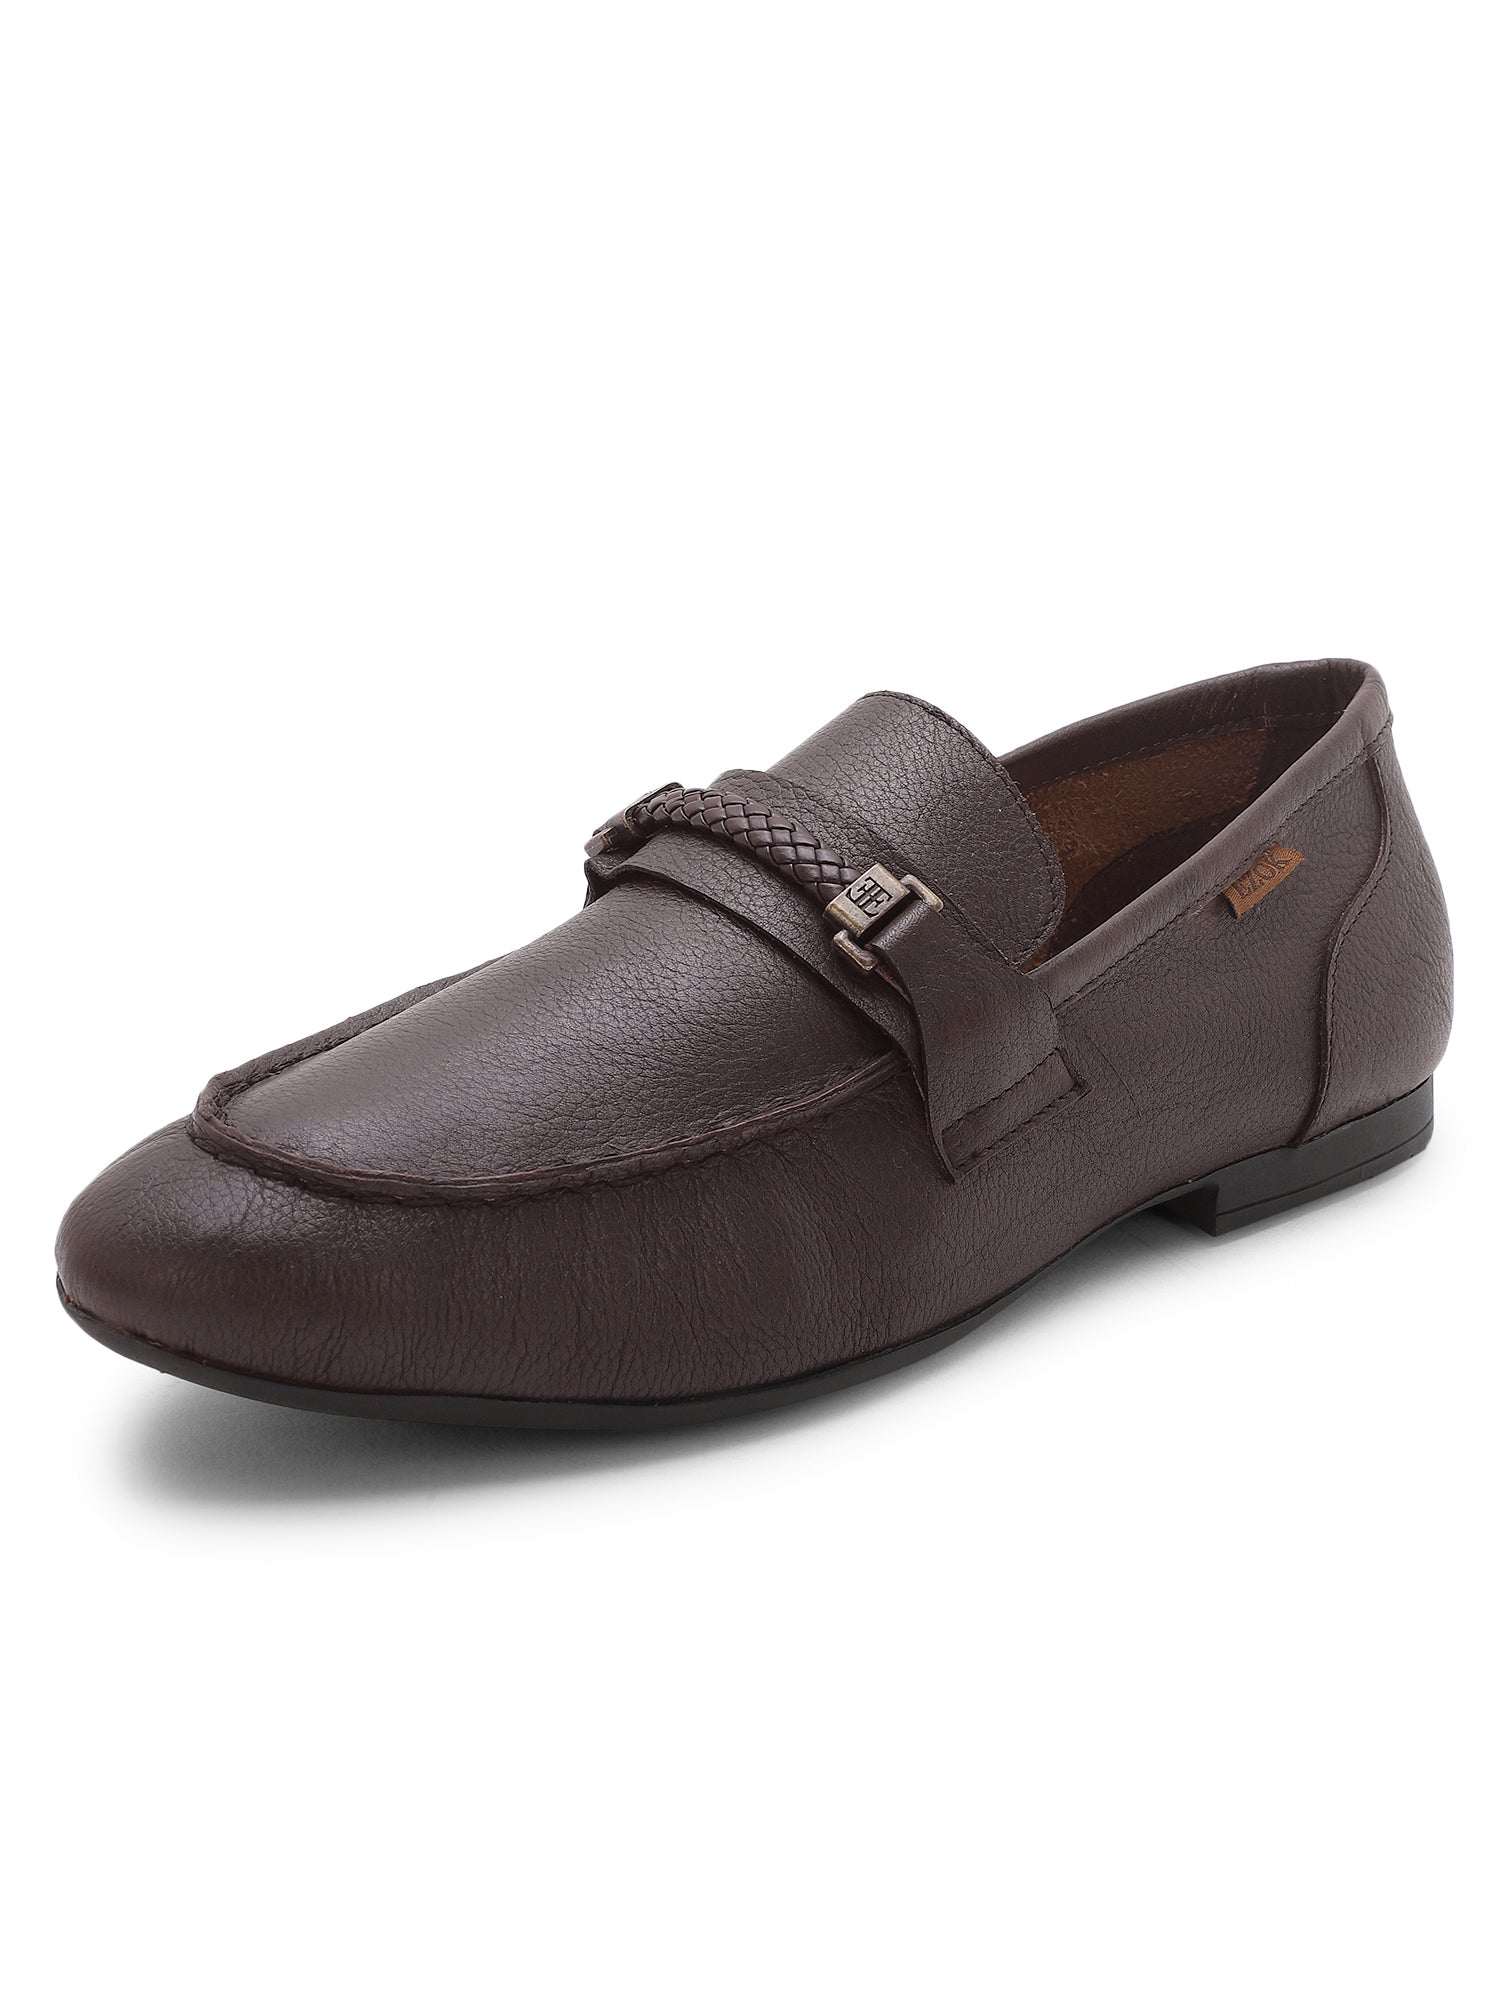 Ezok Shoes Mens Brown Leather Moccasin